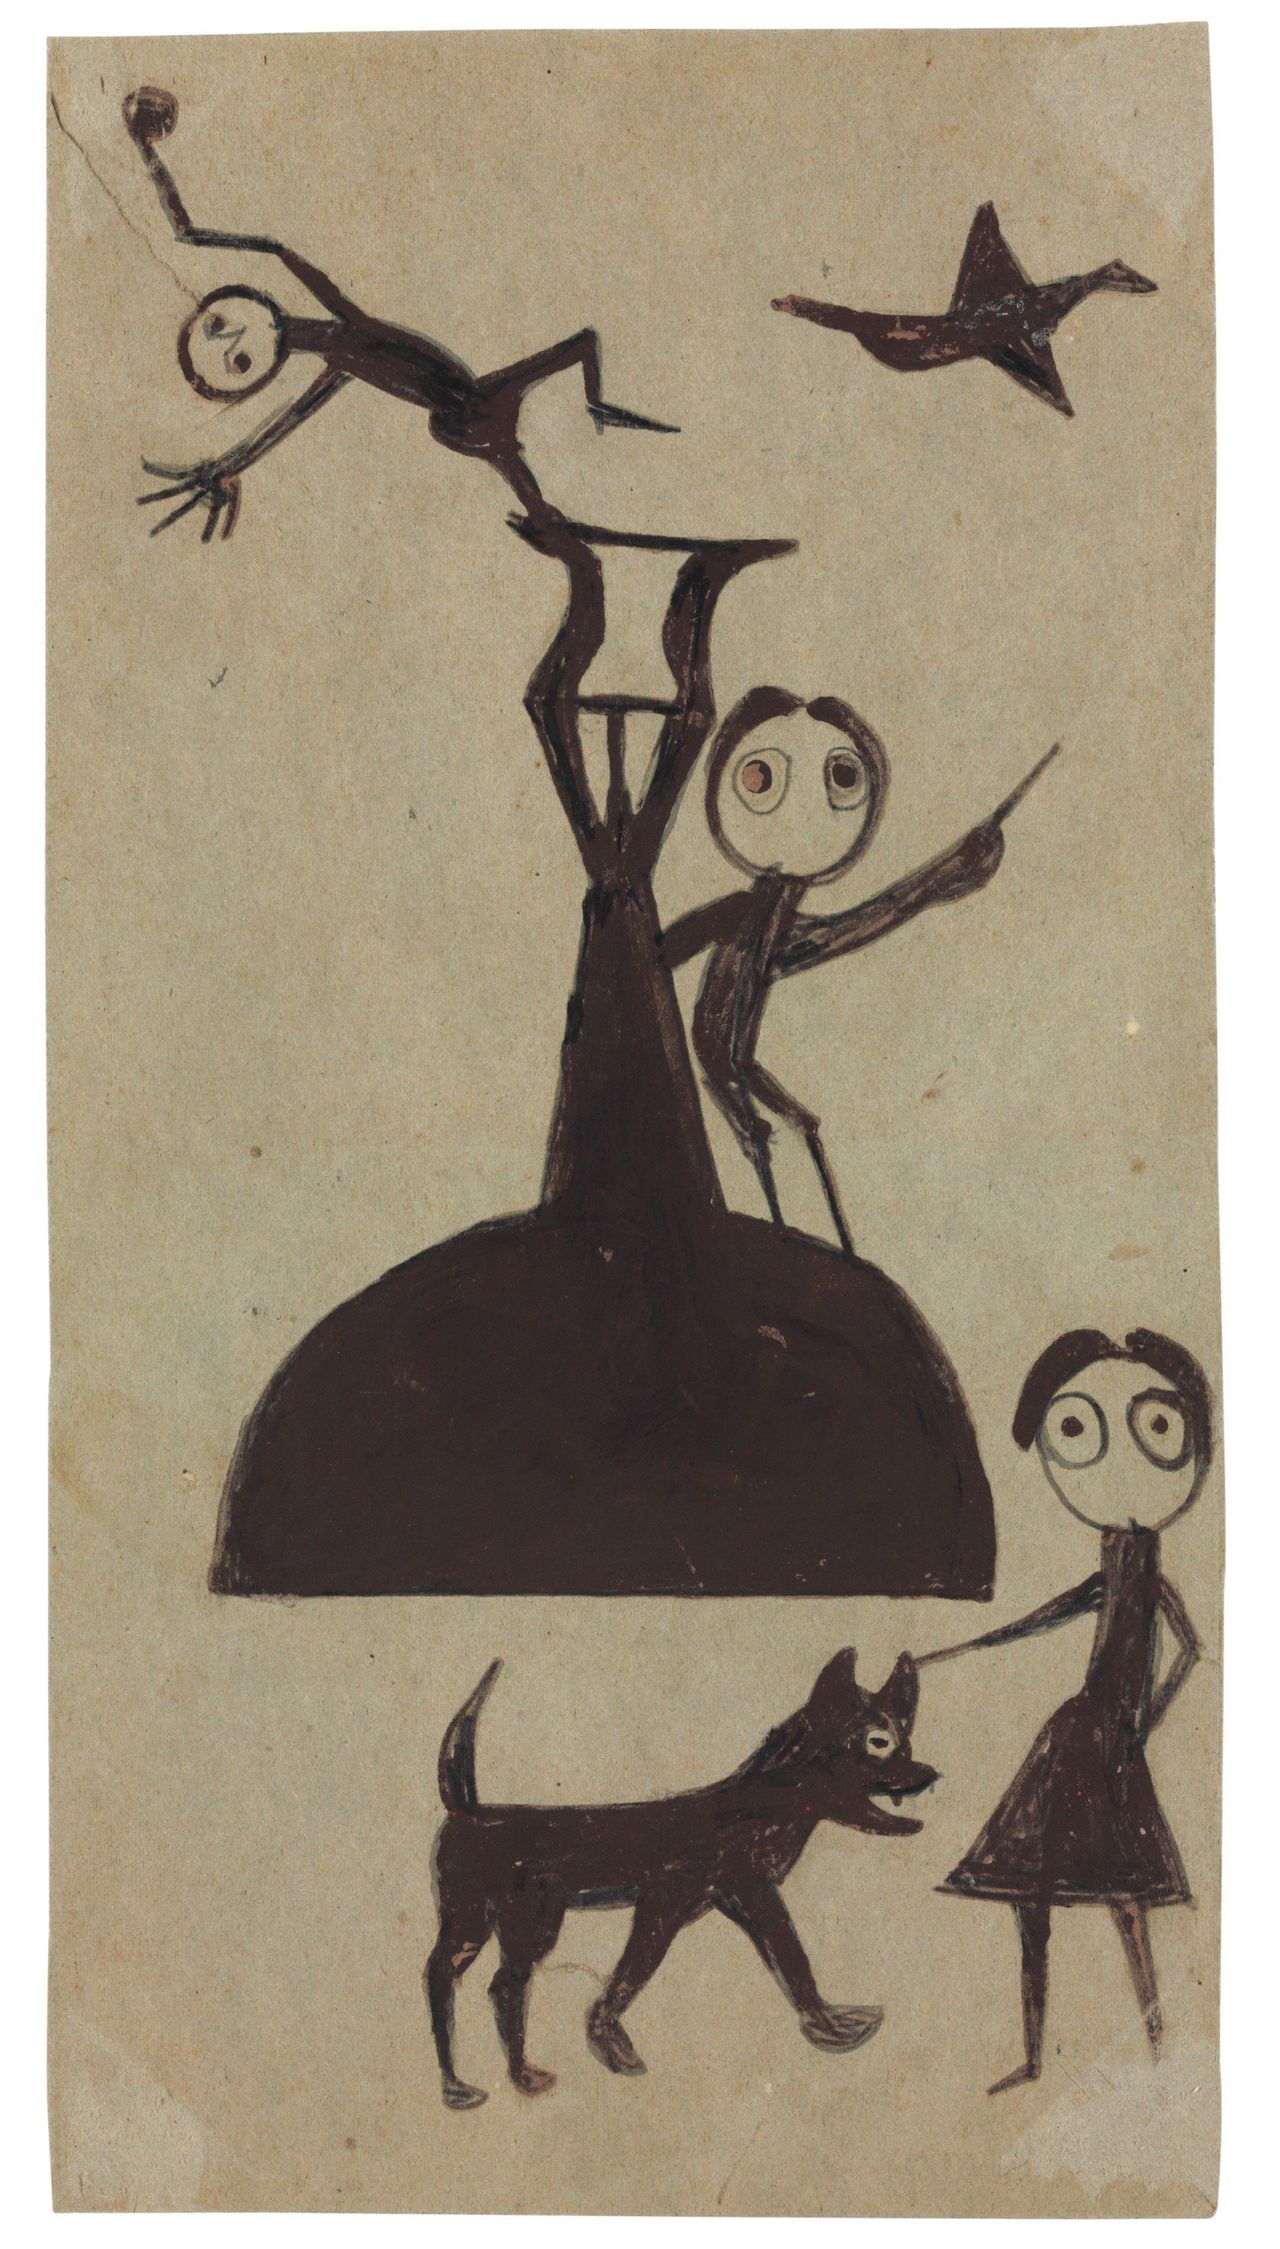 After a lifetime on a plantation, former slave Bill Traylor moved to Montgomery, Alabama. Crippled with rheumatism, he began to draw. This is one of Traylor's exciting events, as it includes multiple figures and animals interacting on and around an abstracted structural element.